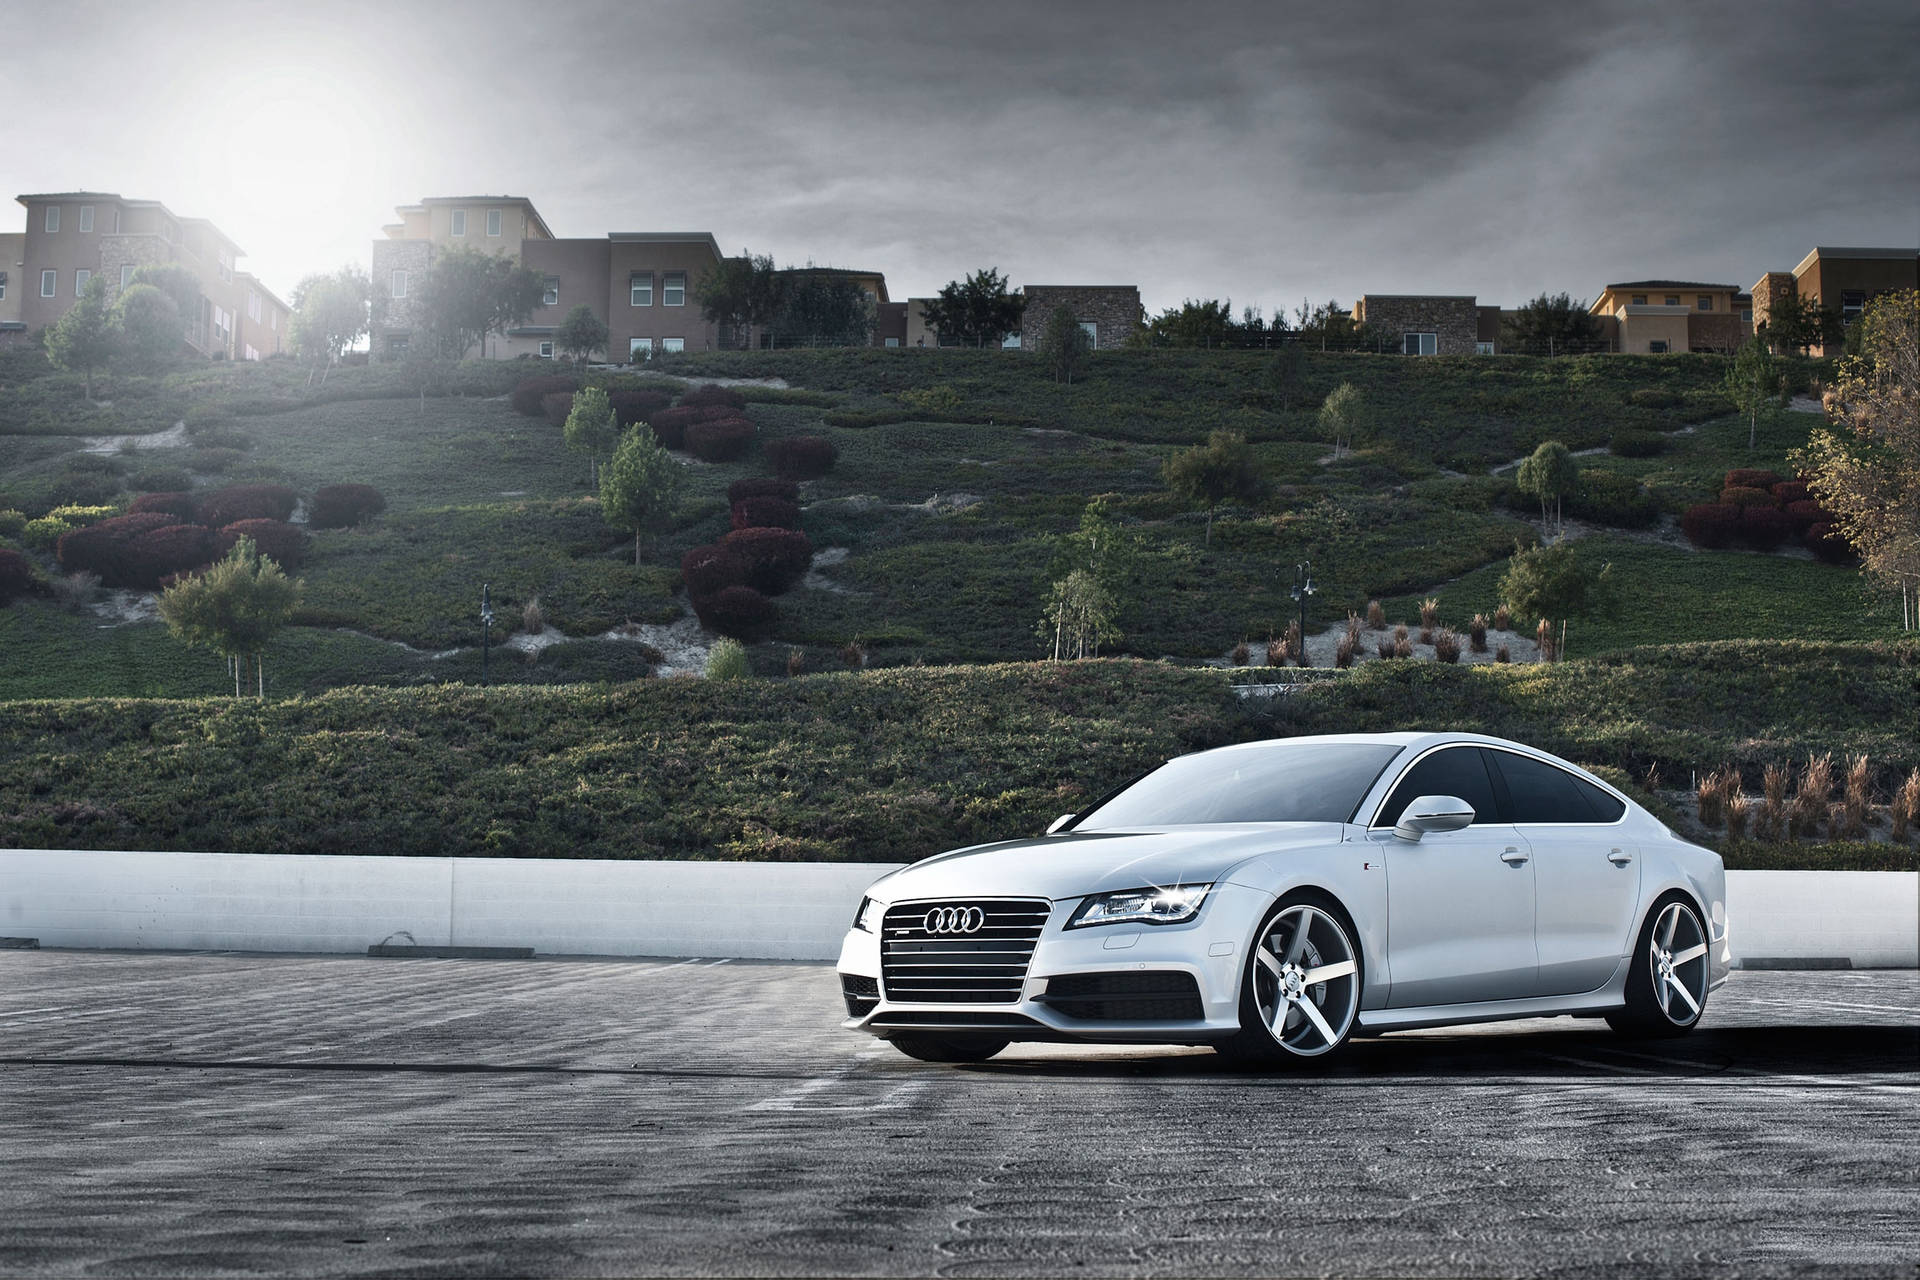 Free Audi Background Photos, [100+] Audi Background for FREE | Wallpapers .com